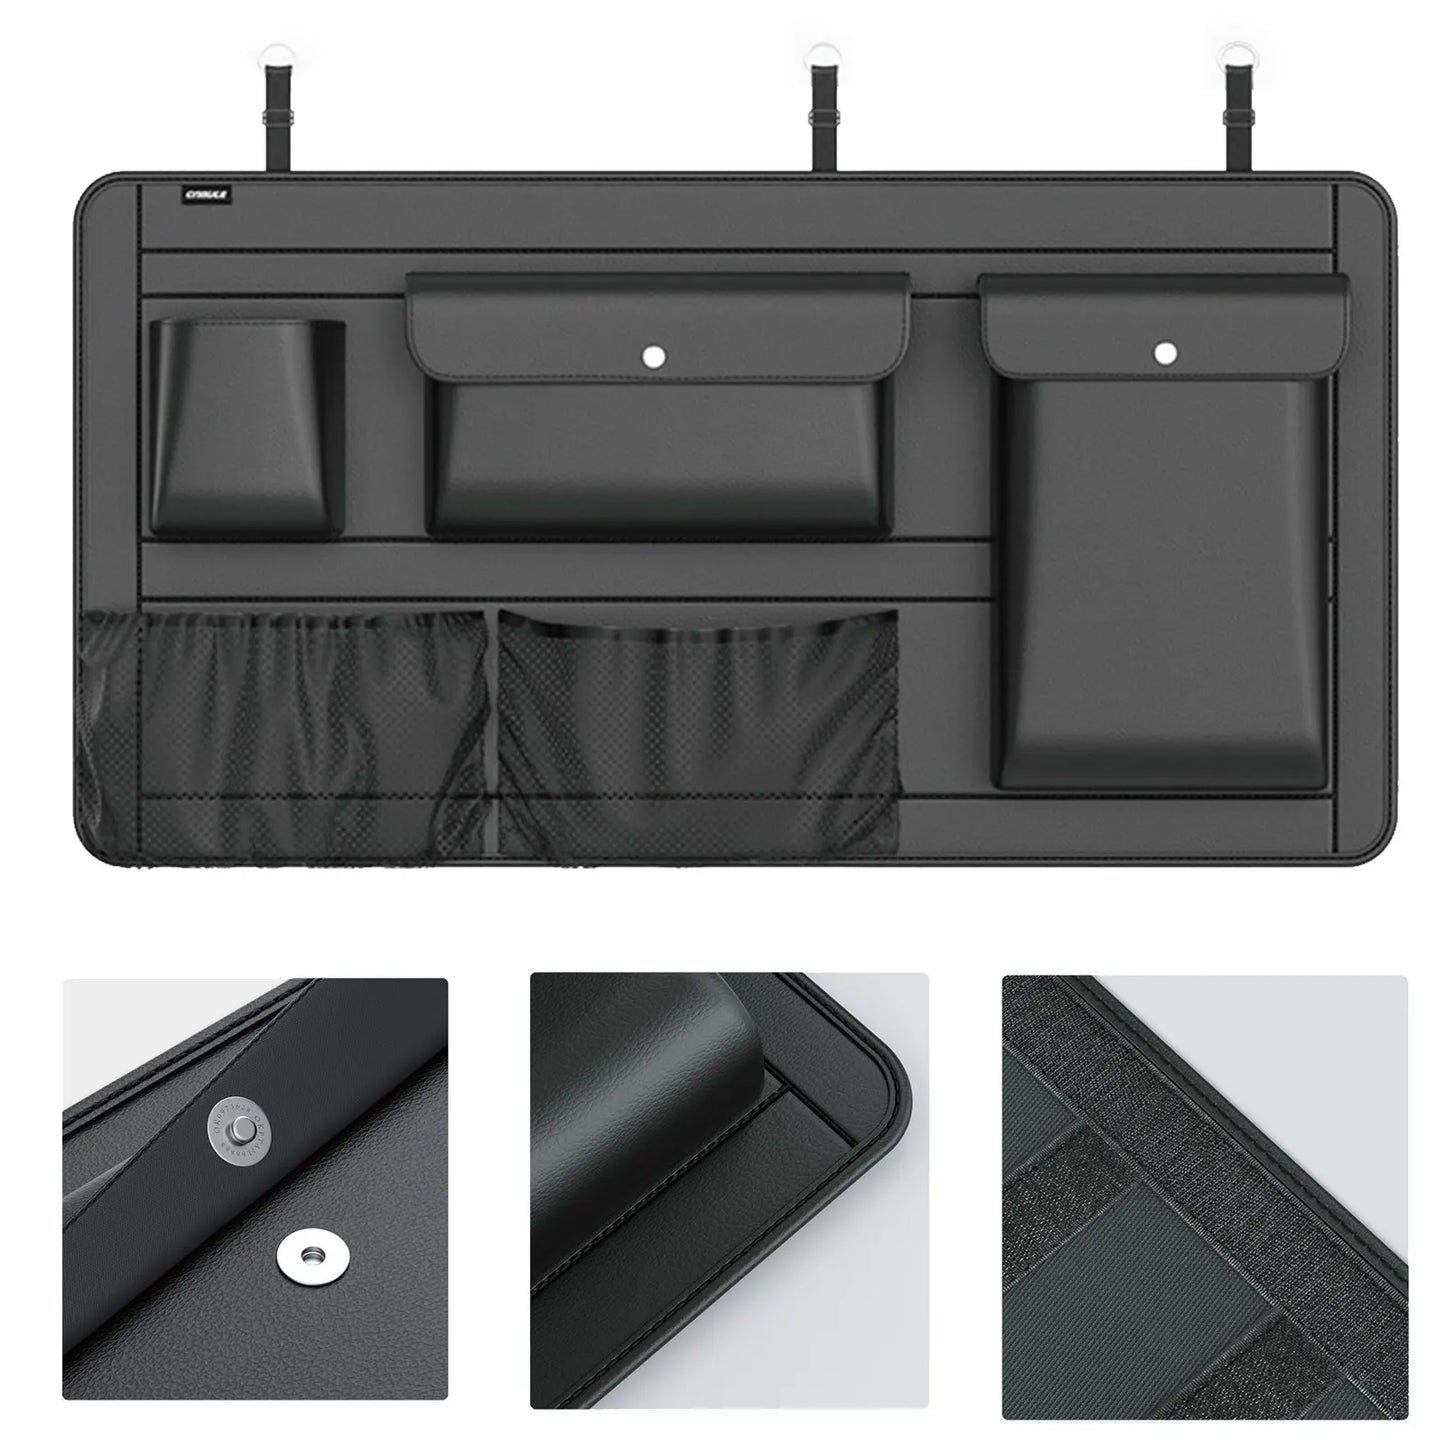 Versatile High-Capacity PU Leather Car Organizer – Adjustable & Waterproof Backseat and Trunk Storage Solution with 5 Pockets